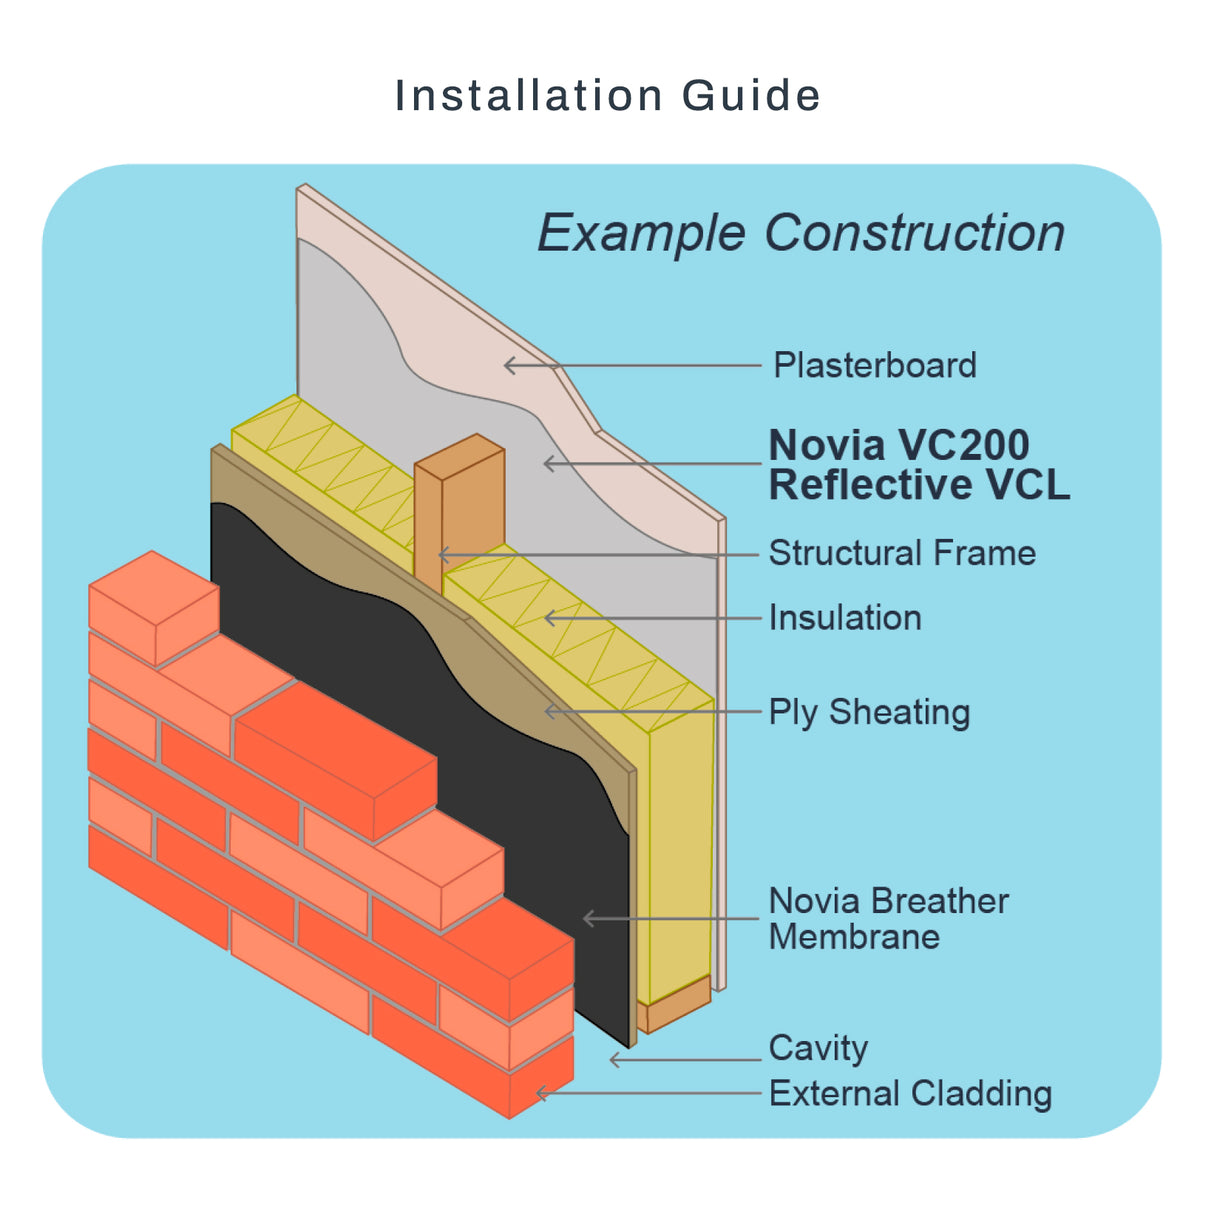 How to install Novia VC200 VCL Vapour Control Layer